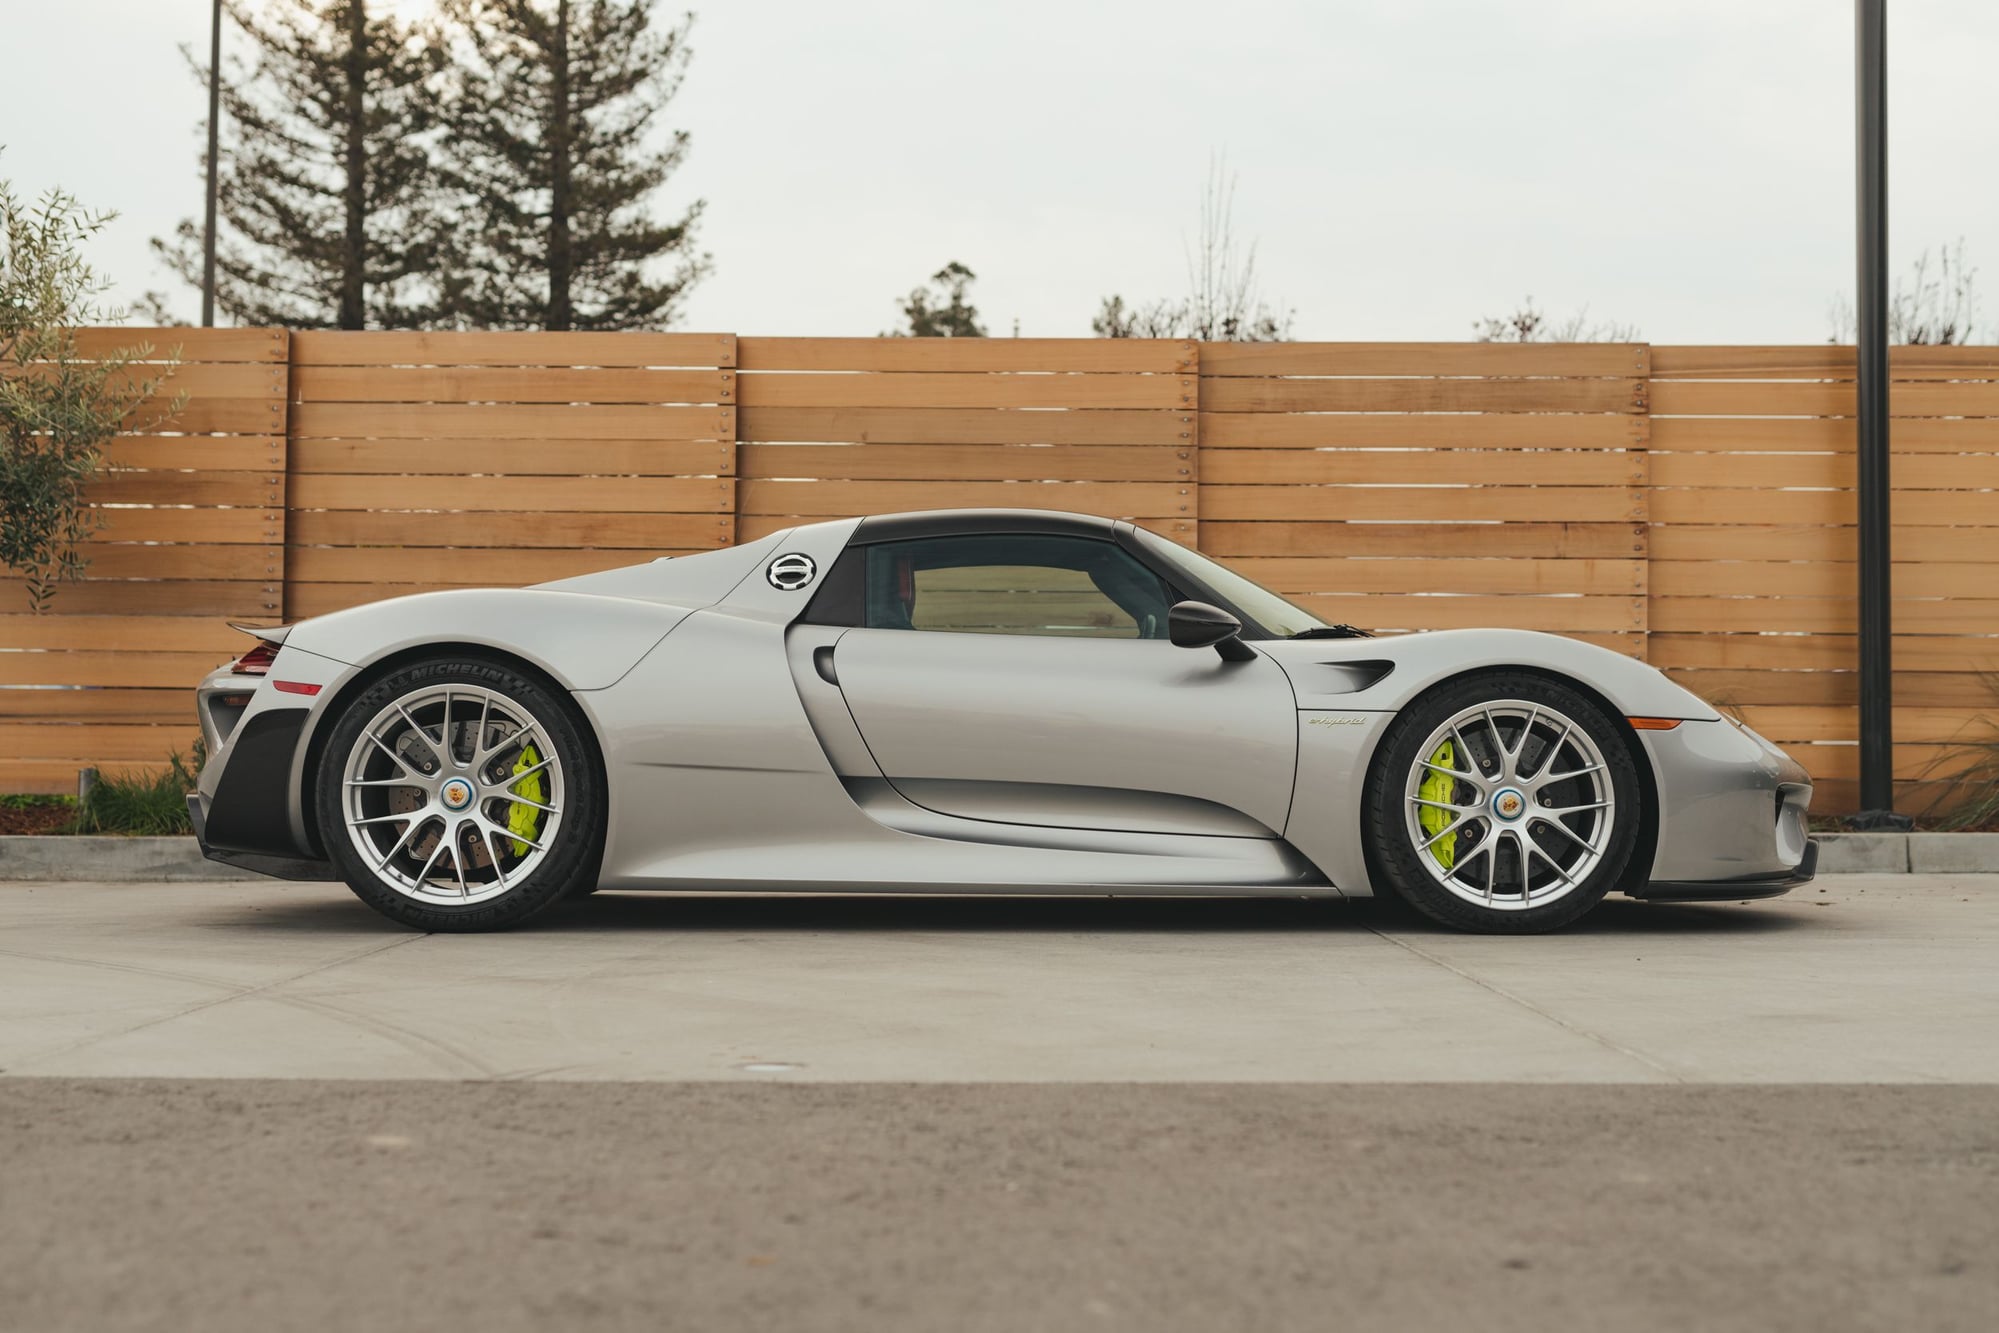 2015 Porsche 918 Spyder - Weissach Package 918 in GT Silver with Garnet Red Interior. 160 Miles from New. - Used - VIN WP0CA2A16FS800067 - 160 Miles - 8 cyl - AWD - Automatic - Convertible - Silver - San Carlos, CA 94070, United States